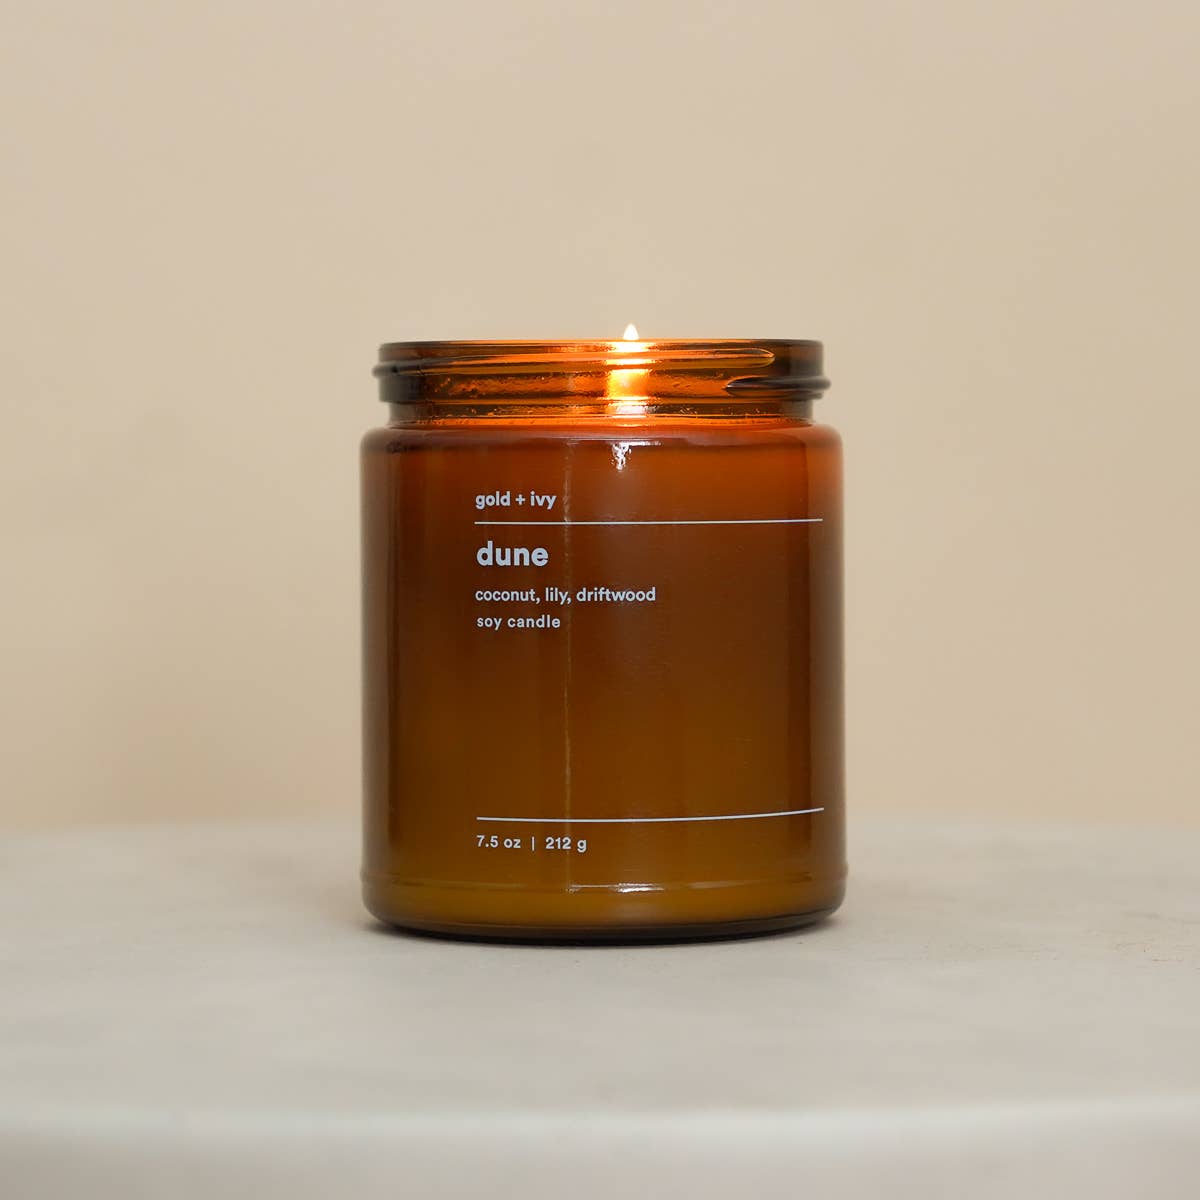 dune soy candle - standard 7.5 oz.